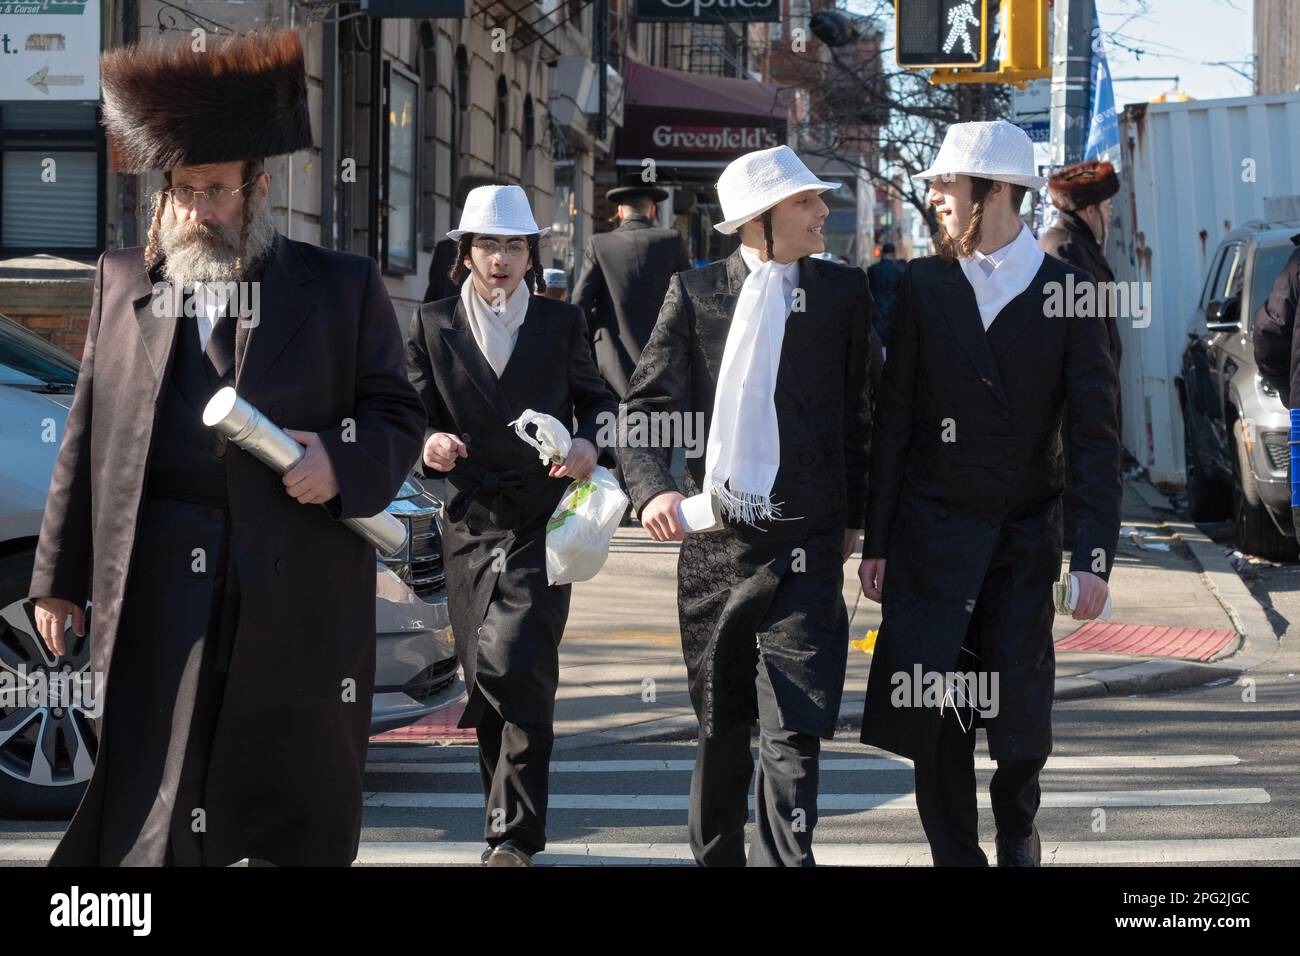 A Purim street scene in Brooklyn with a man in a shtreimal and boys in costumes. Stock Photo